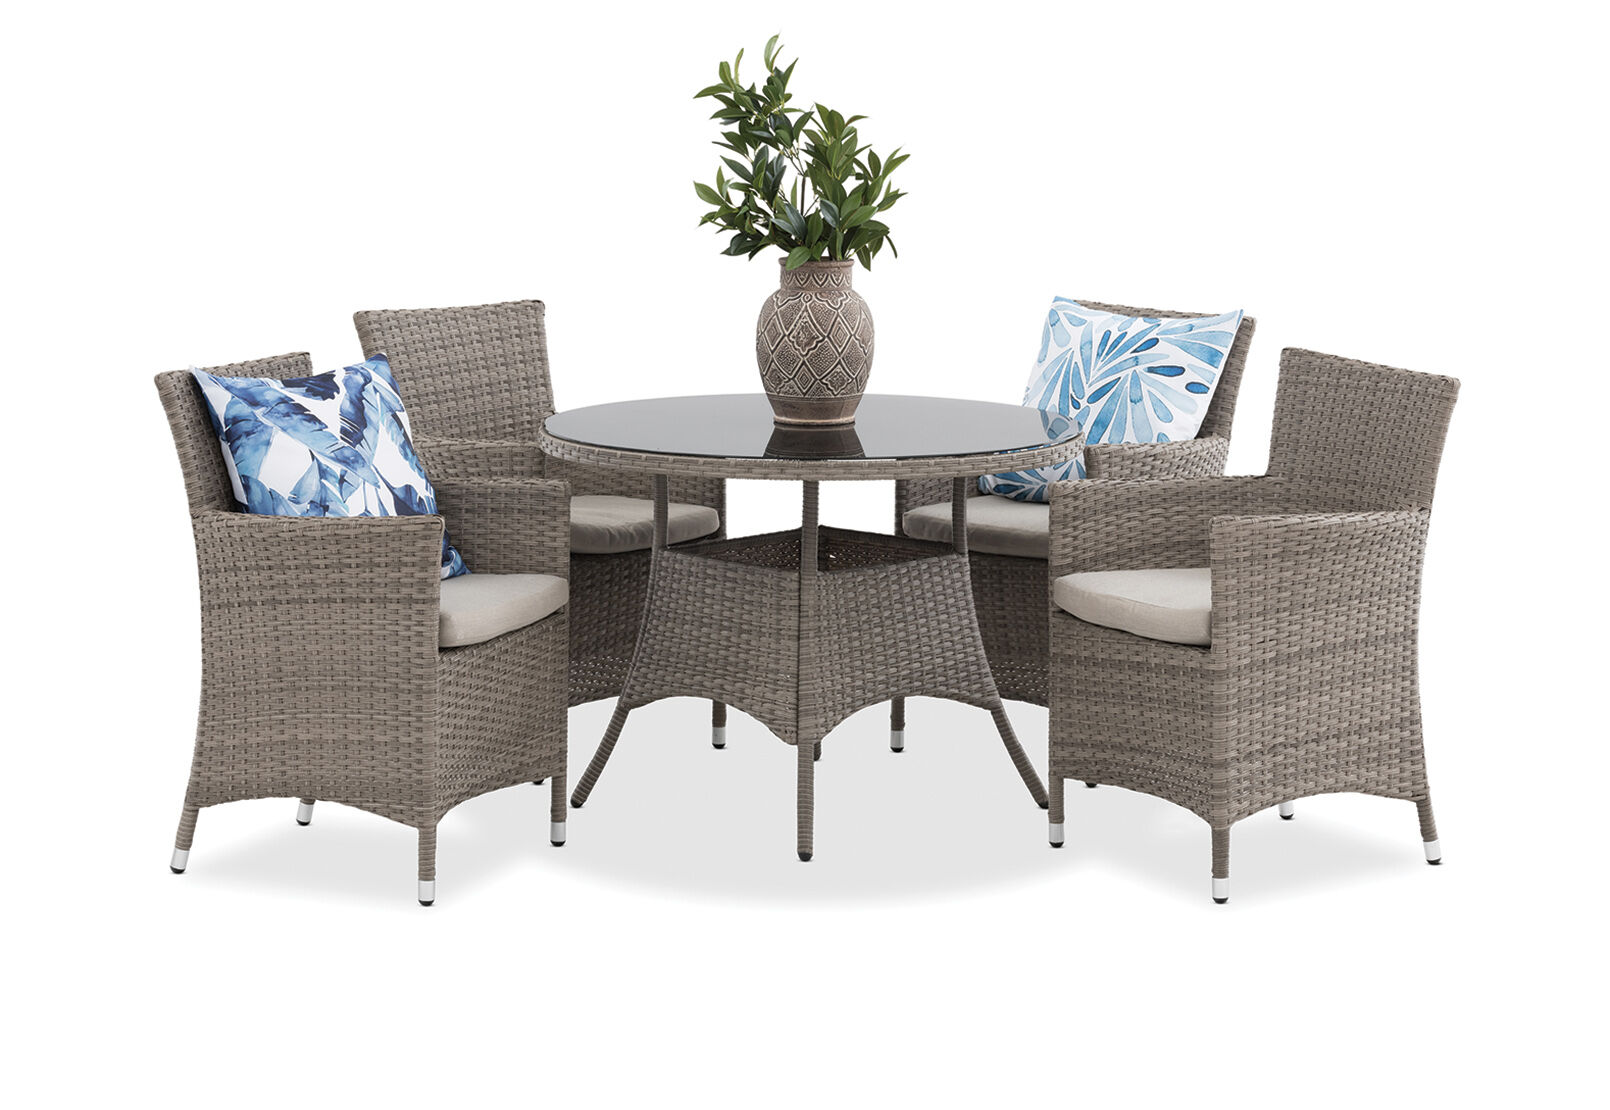 Barbosa 5 Piece Round Outdoor Dining Setting